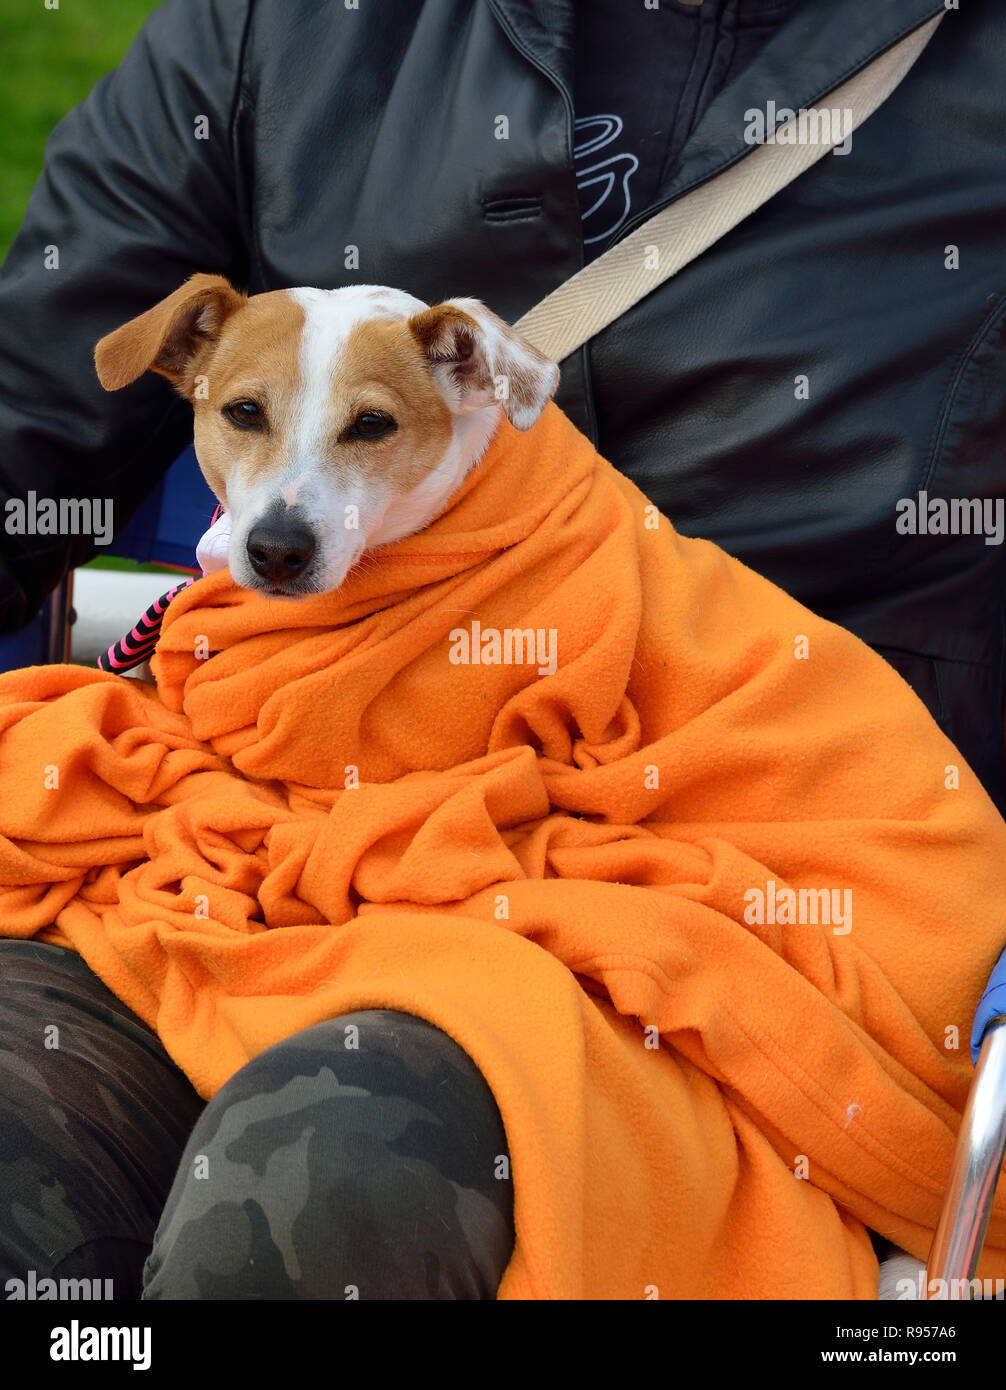 Jack Russell Terrier wrapped up in orange blanket on King's Day, a national holiday celebrating King Willem Alexander's birthday, Alkmaar, Holland Stock Photo